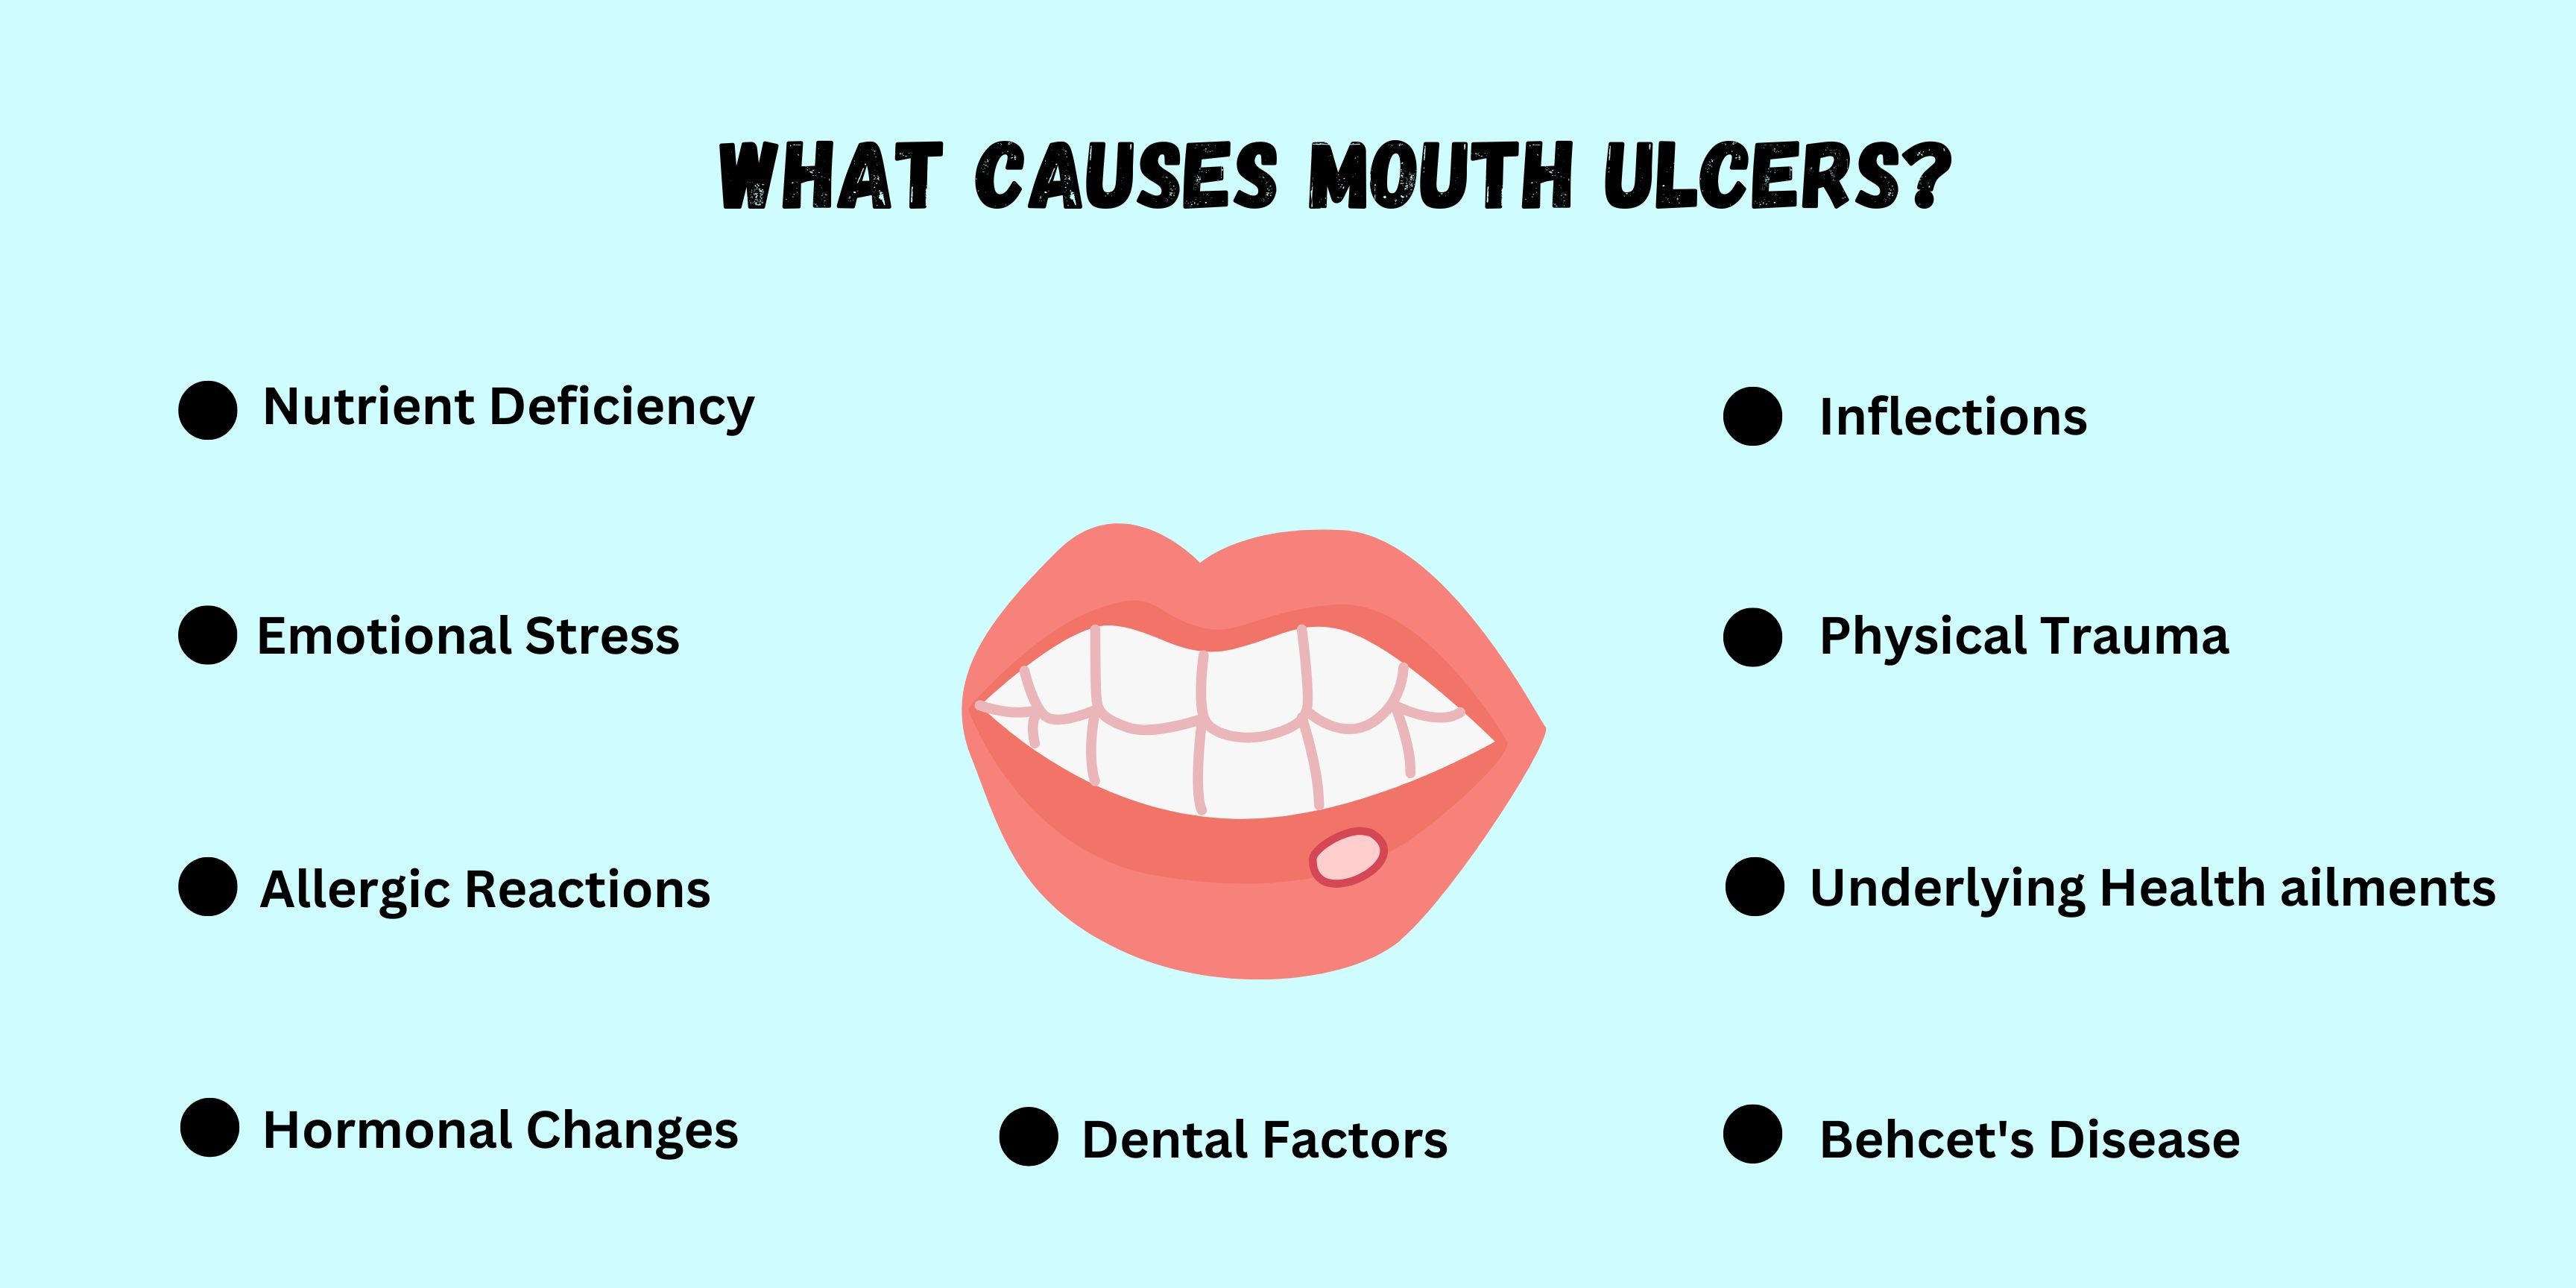 What Causes Mouth Ulcers